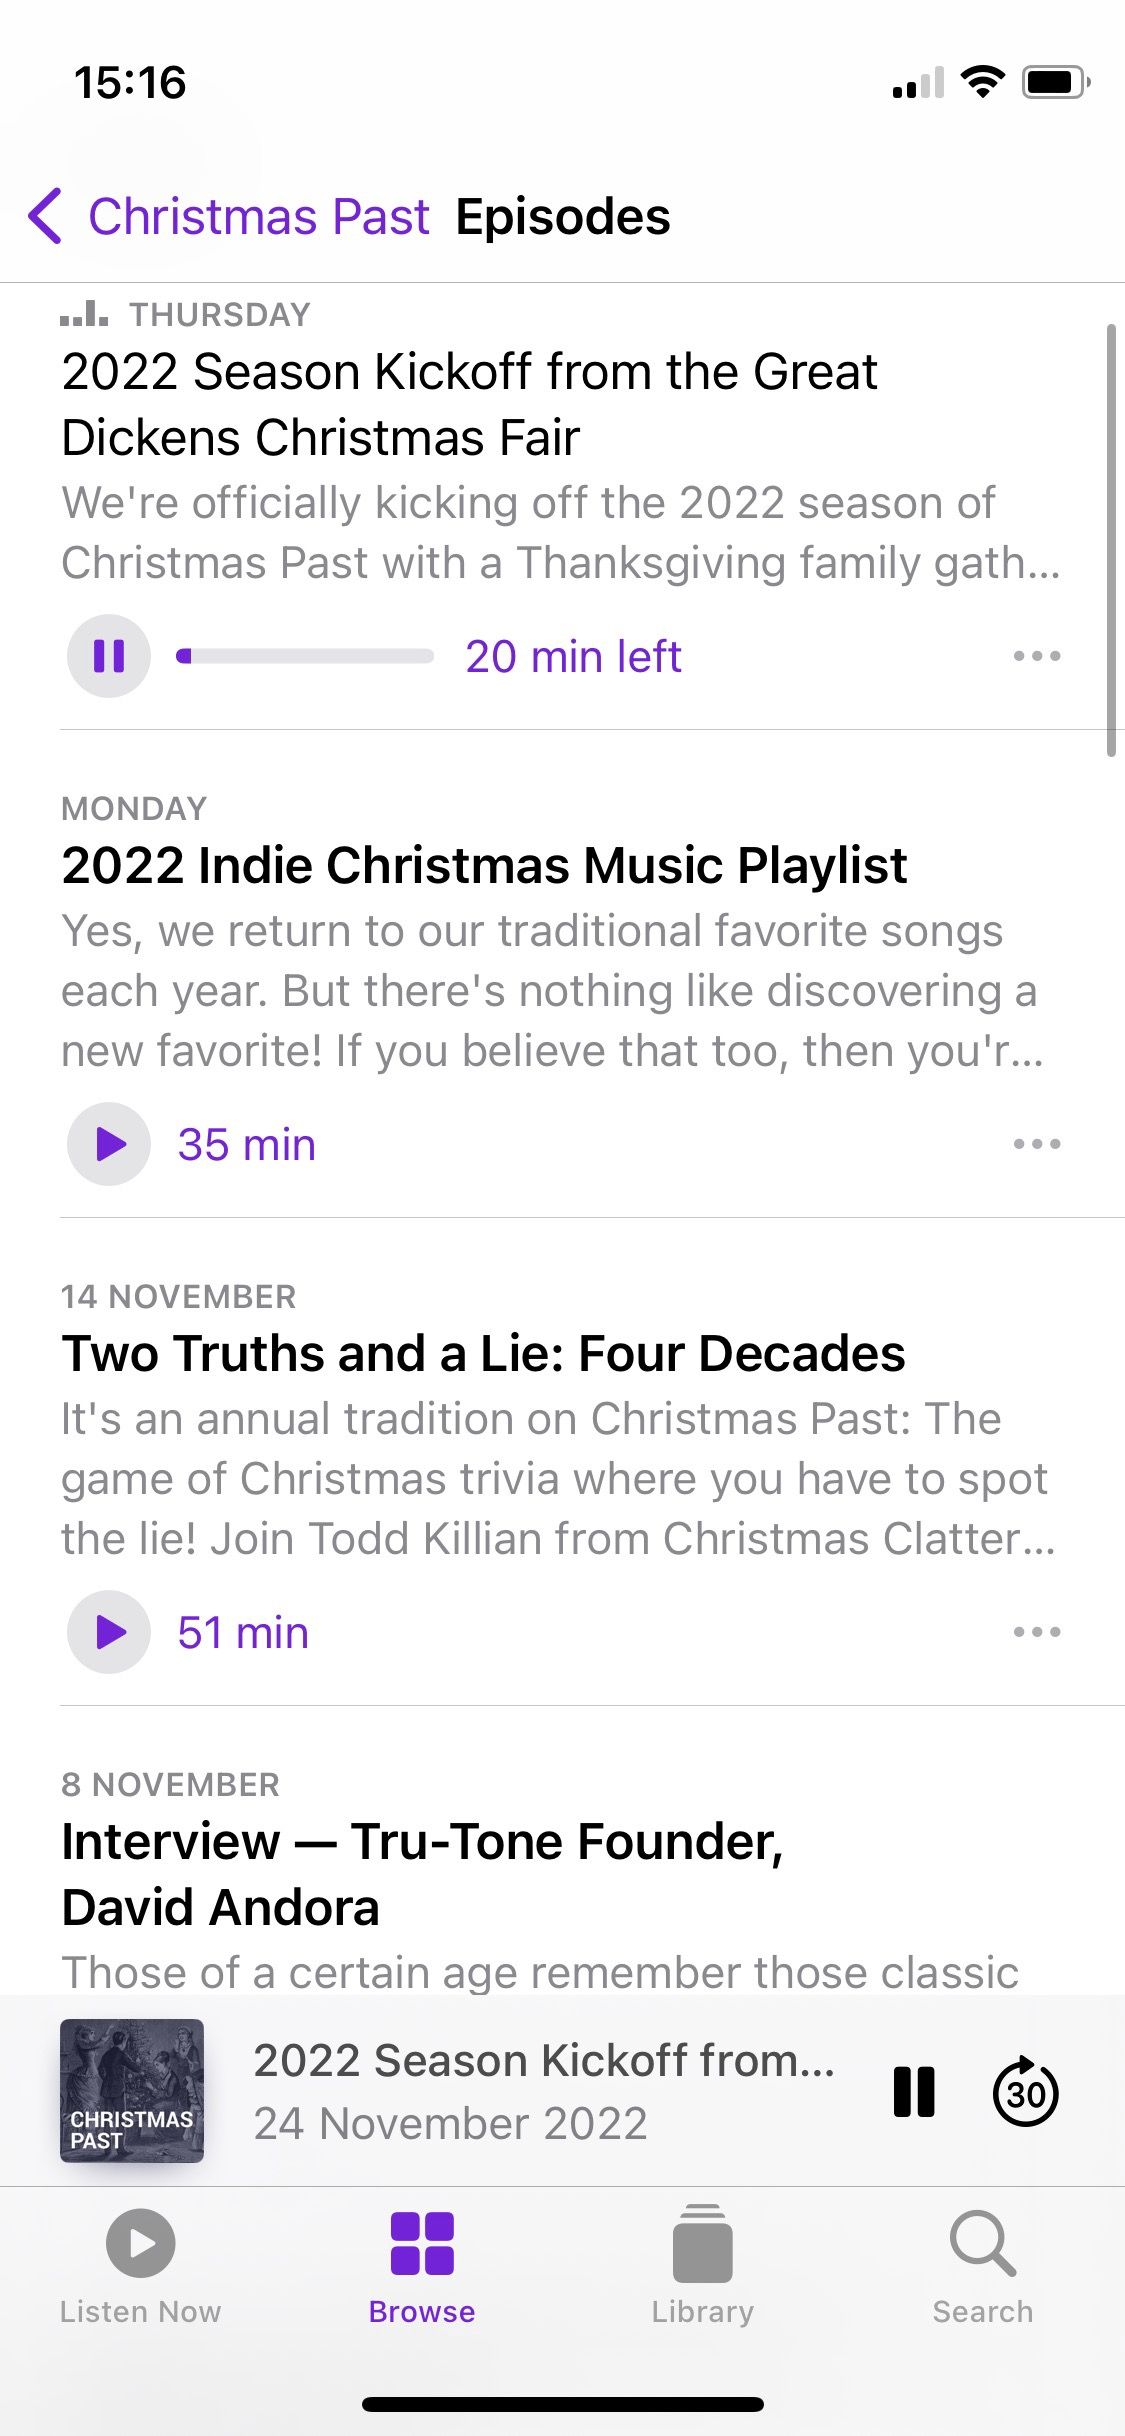 Screenshot of the Christmas Past podcast showing the list of episodes